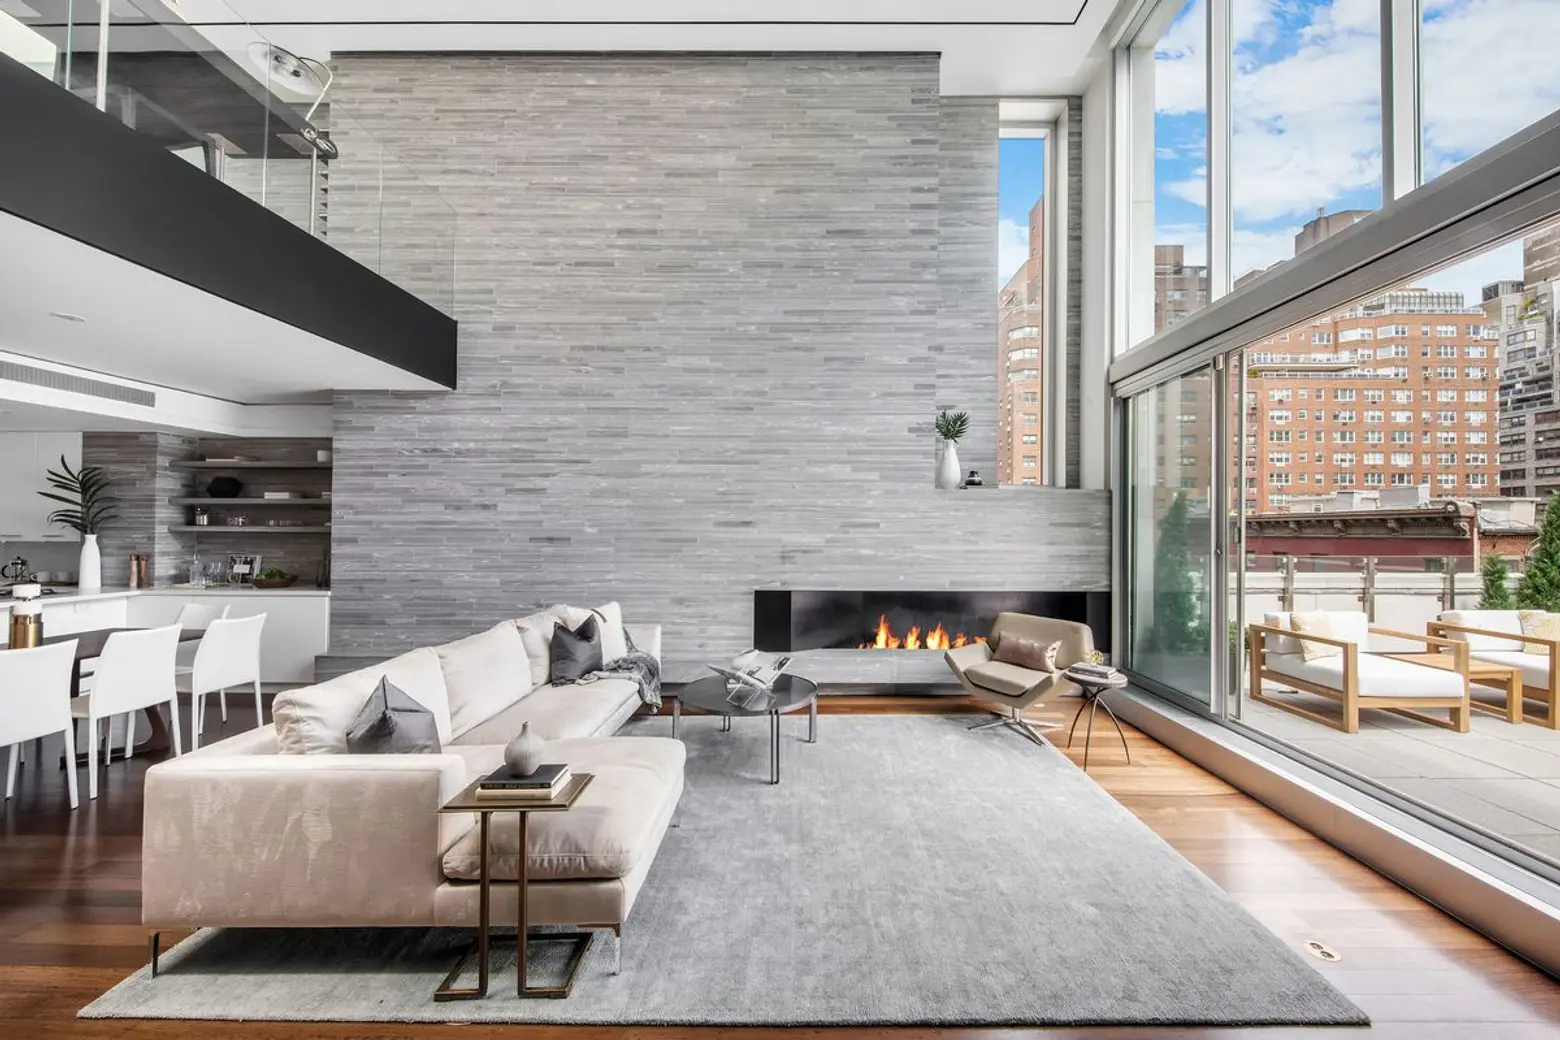 For $7M, an Upper East Side penthouse with a floating study and four terraces